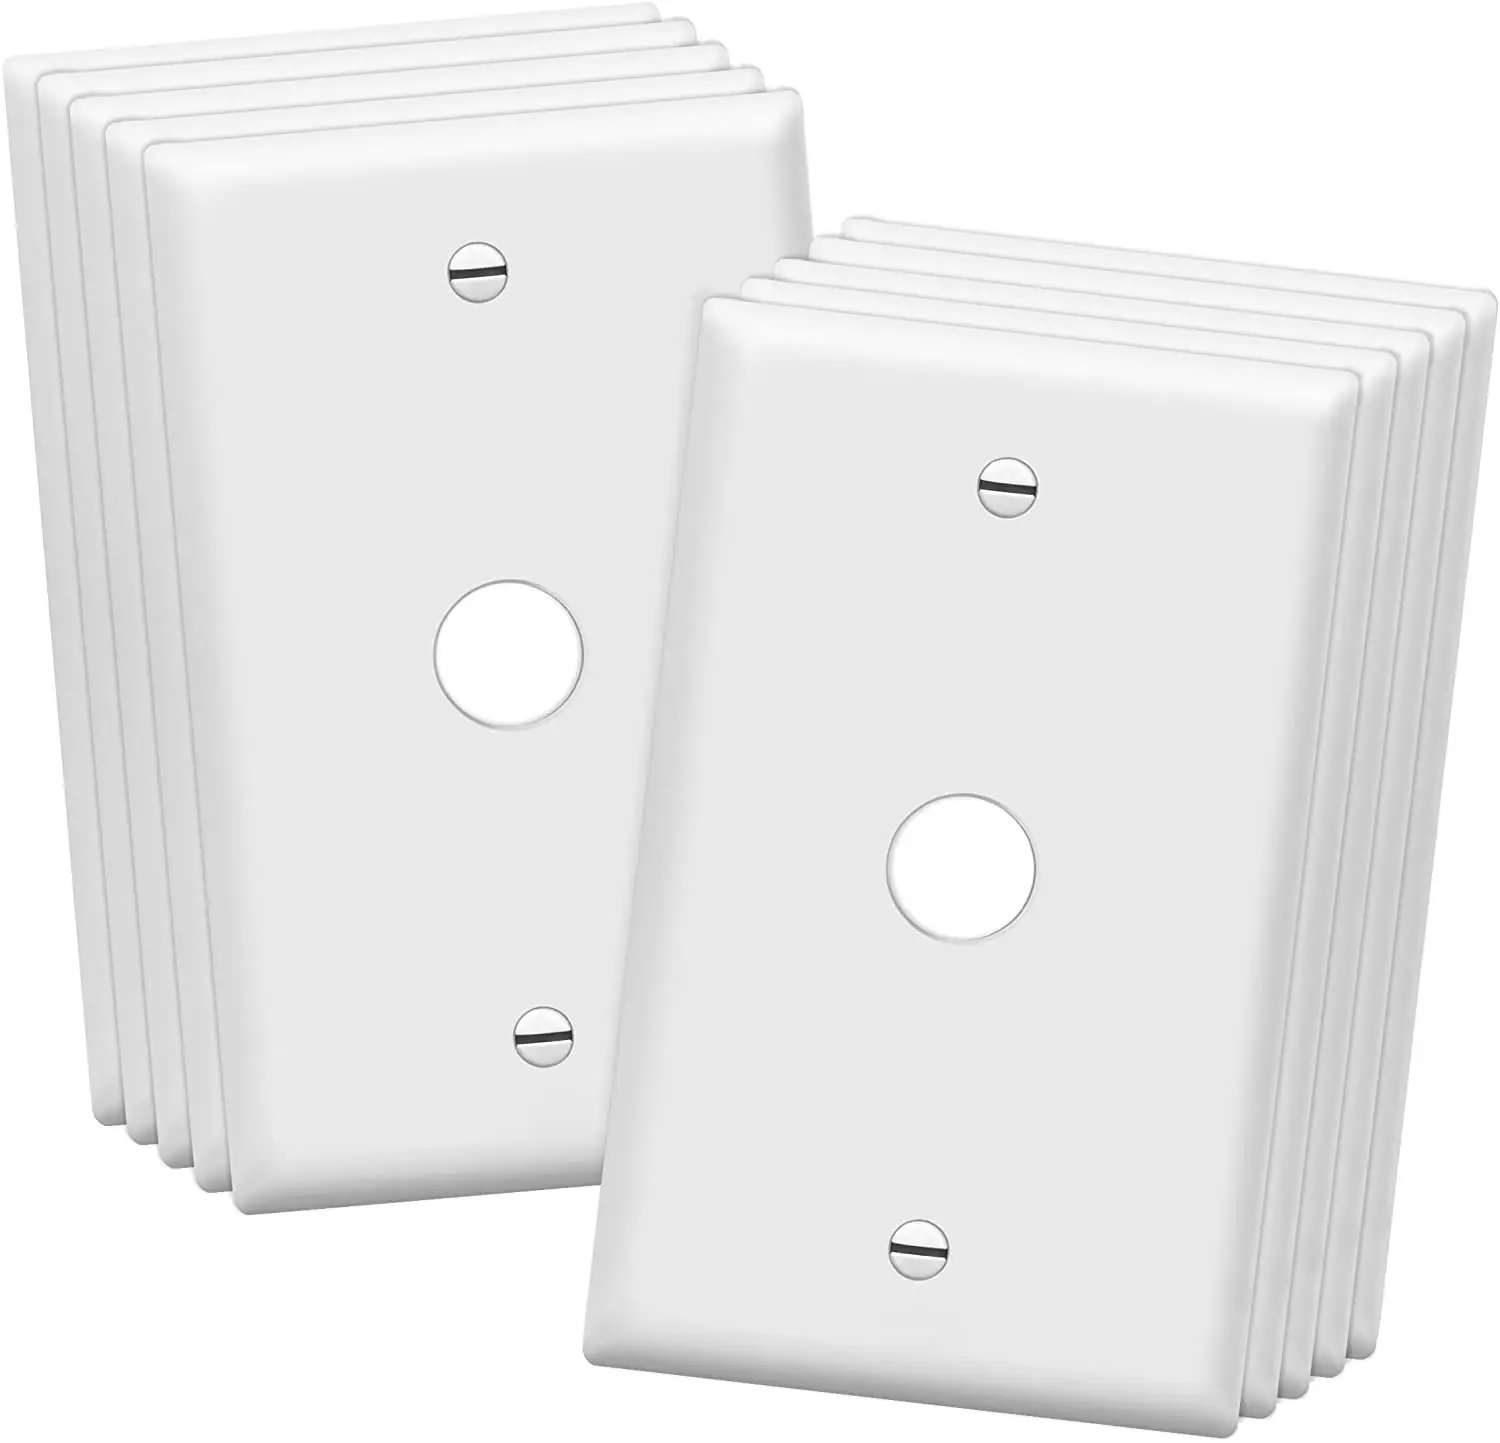 0.625" Hole Phone Cable covers outlet wall plates Standard Size 1-Gang C660P1-W White Telephone or Cable Outlet Wallplatess